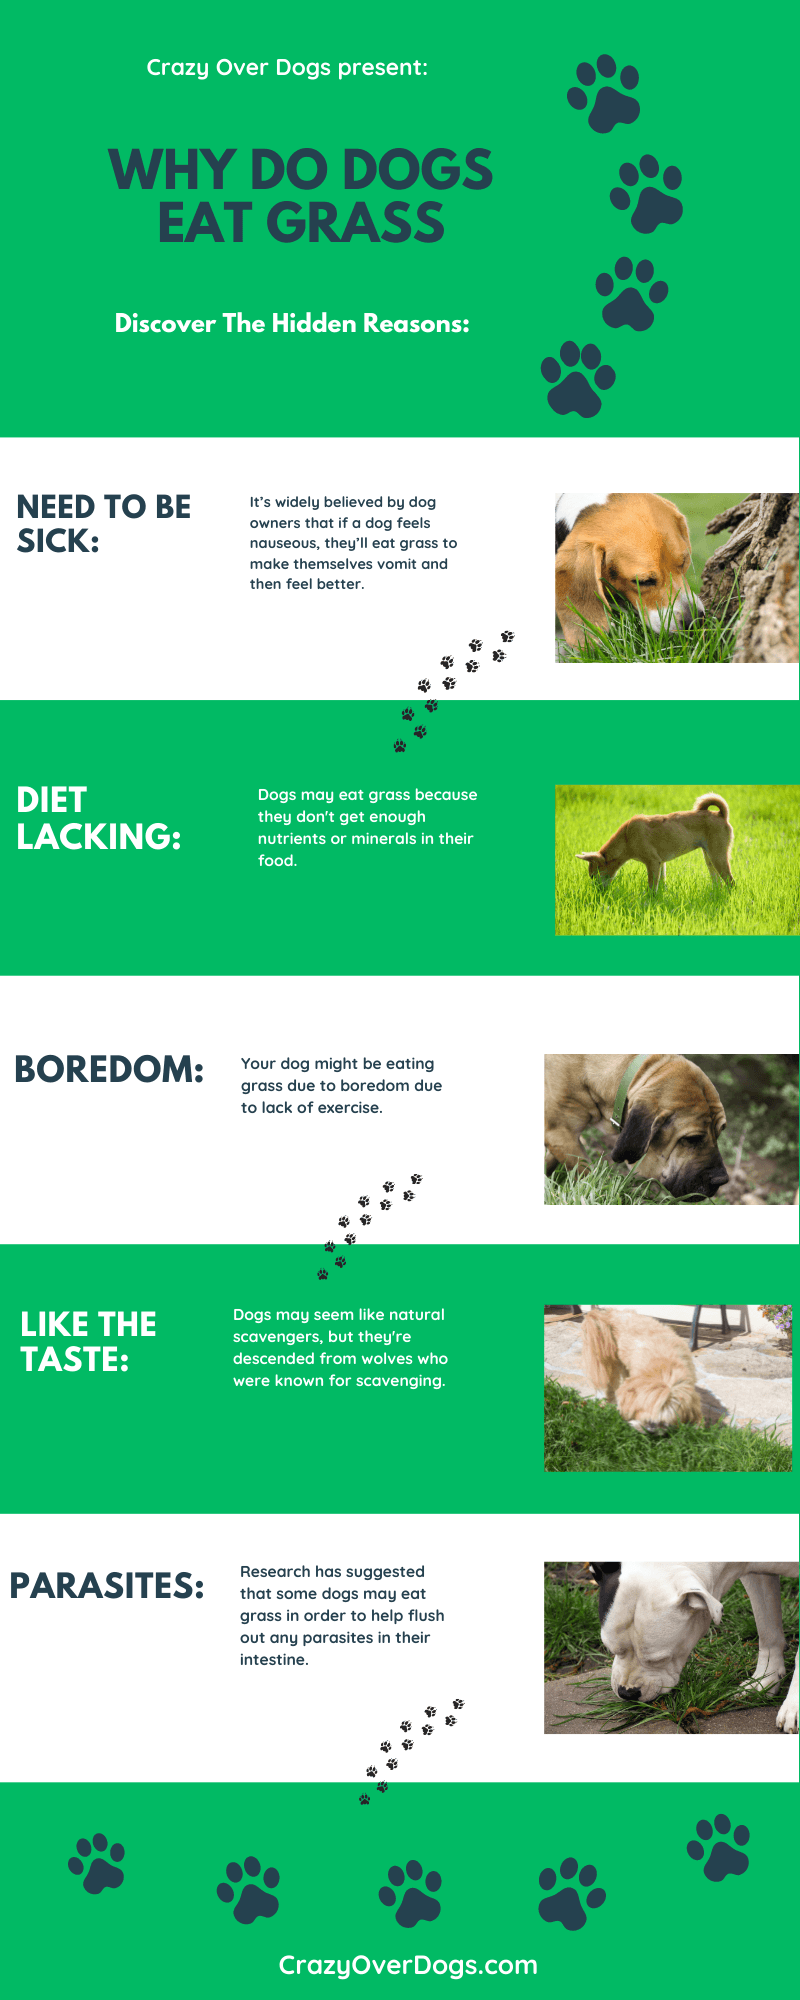 Why Do Dogs Eat Grass Infographic